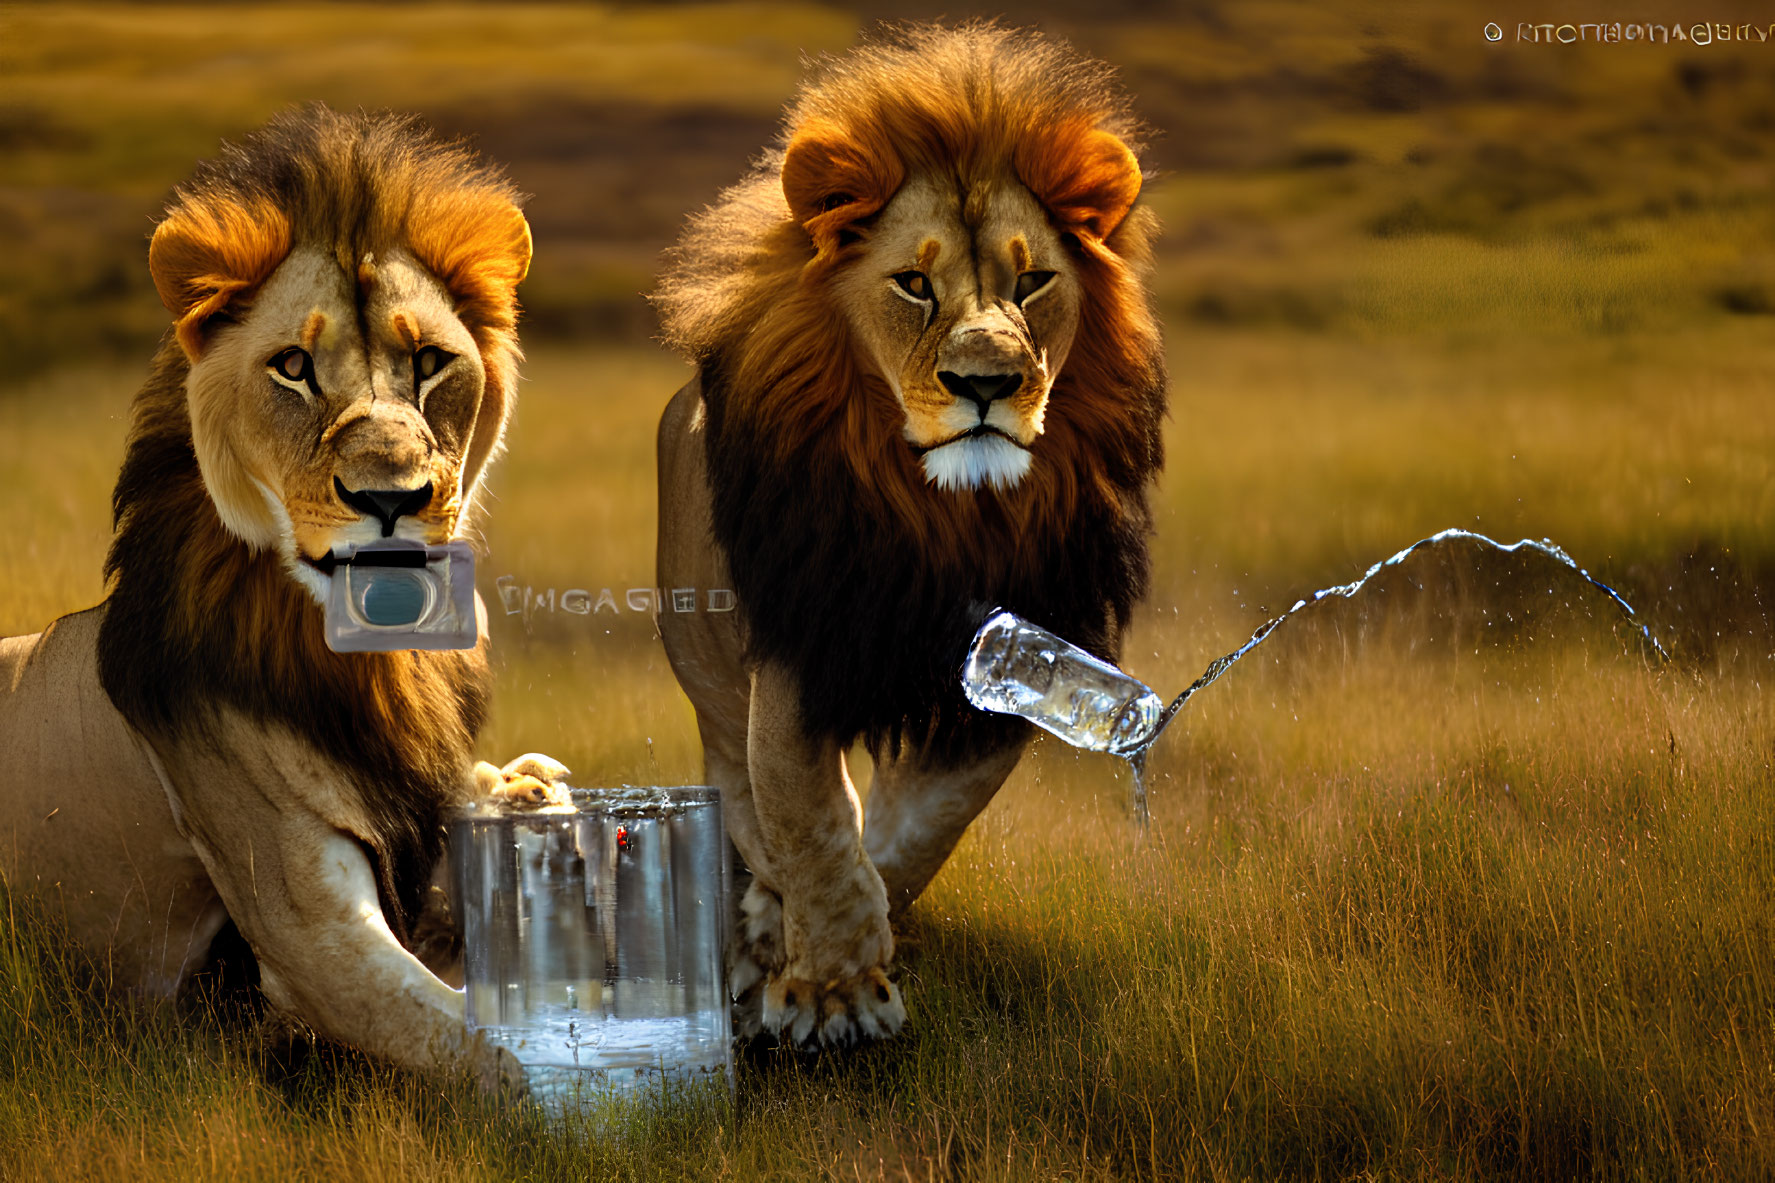 Lions displaying human-like behaviors with glass and water in savannah.